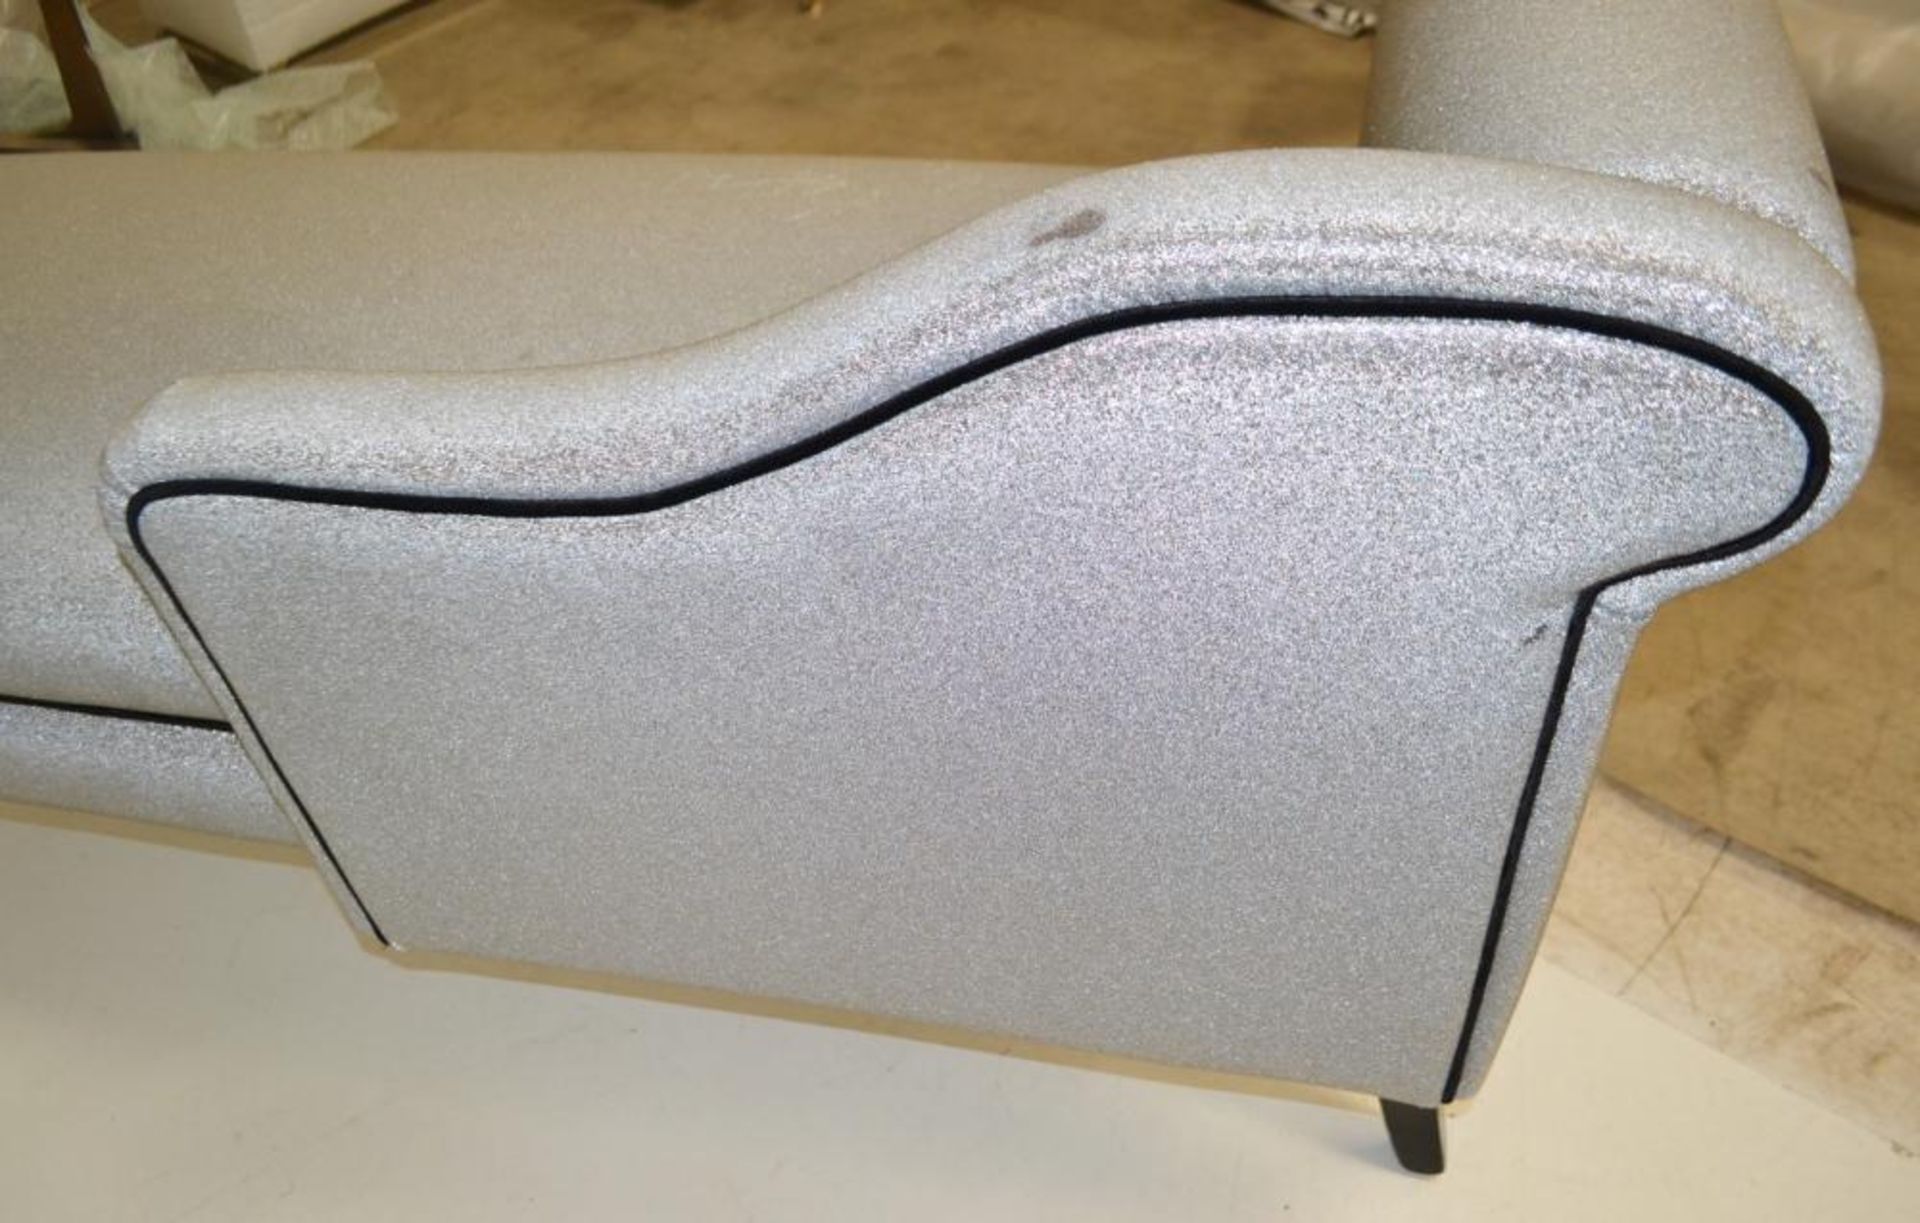 1 x Chaise Lounge Chair Finished In Silver Glitter - Ref: BLT376 - CL380 - NO VAT ON THE HAMMER - - Image 6 of 8